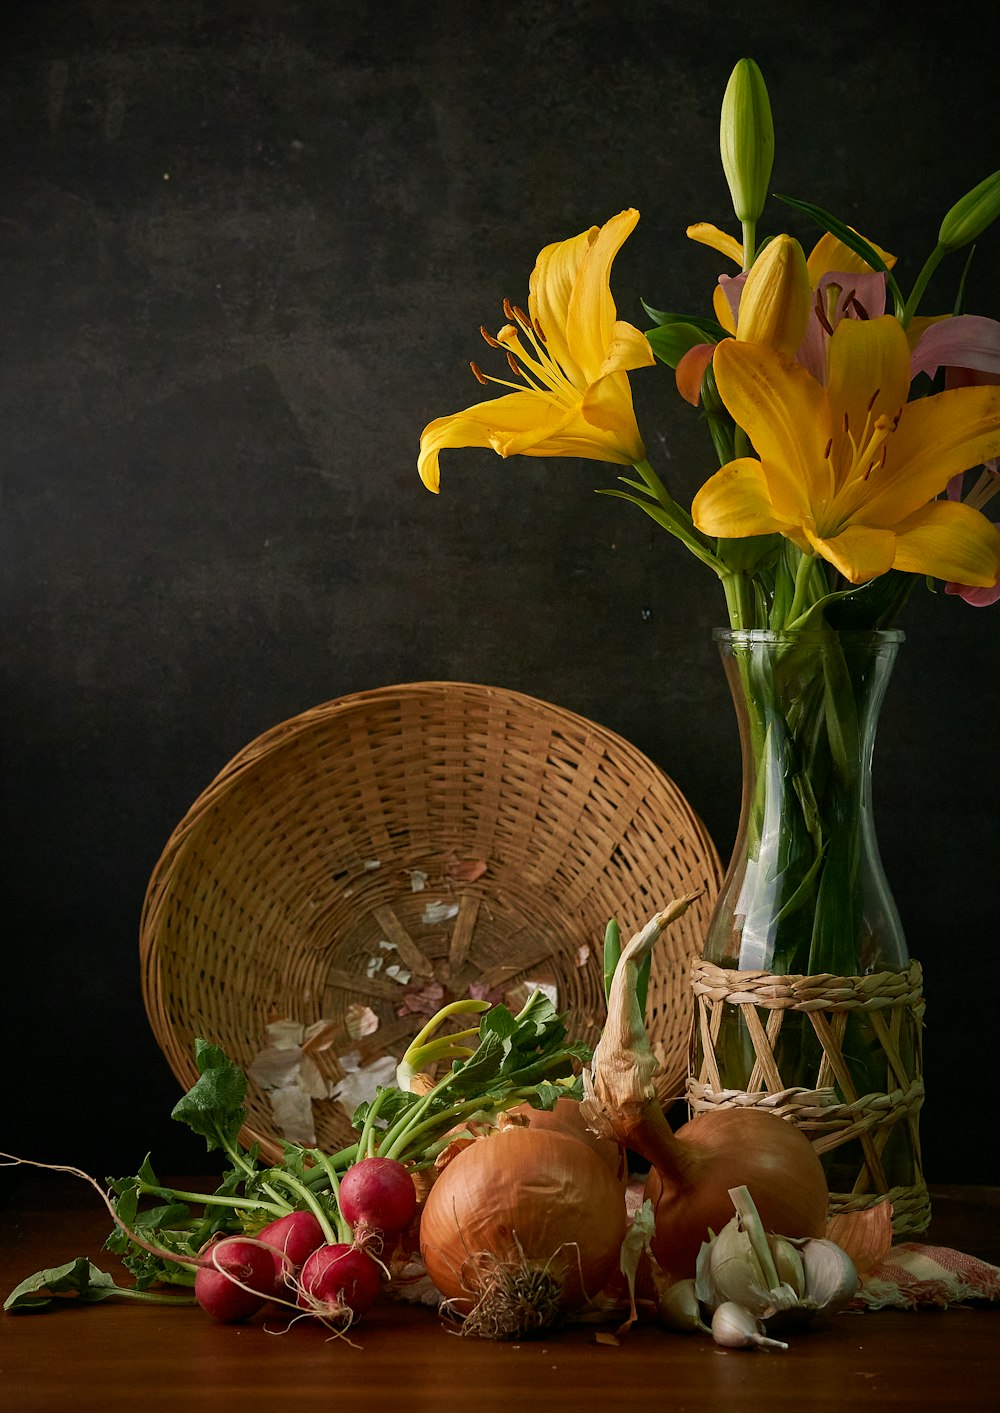 a vase filled with yellow flowers next to onions and radishes